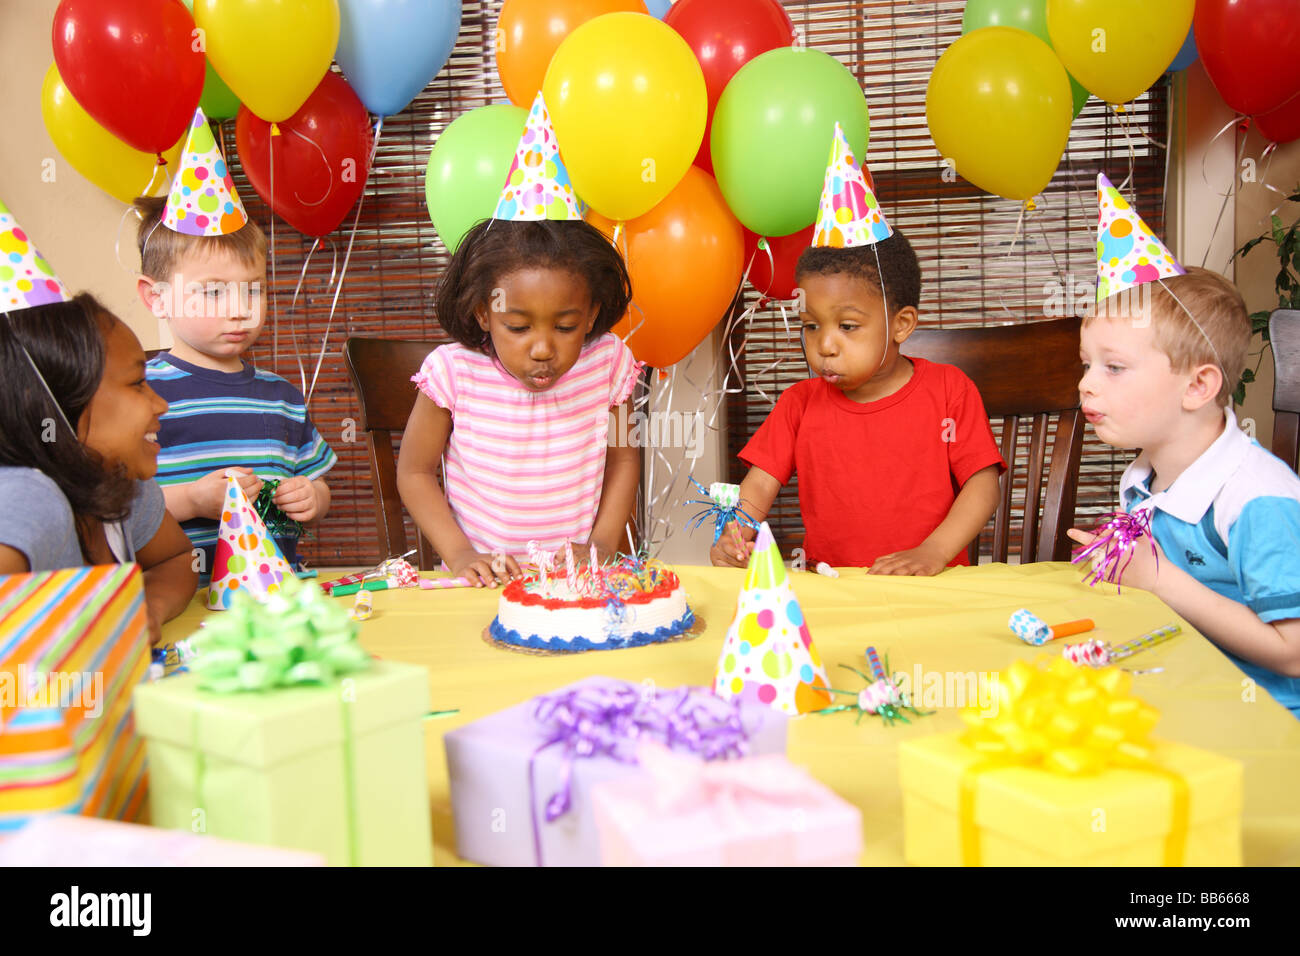 Young Girl blowing out candles at Birthday party Banque D'Images